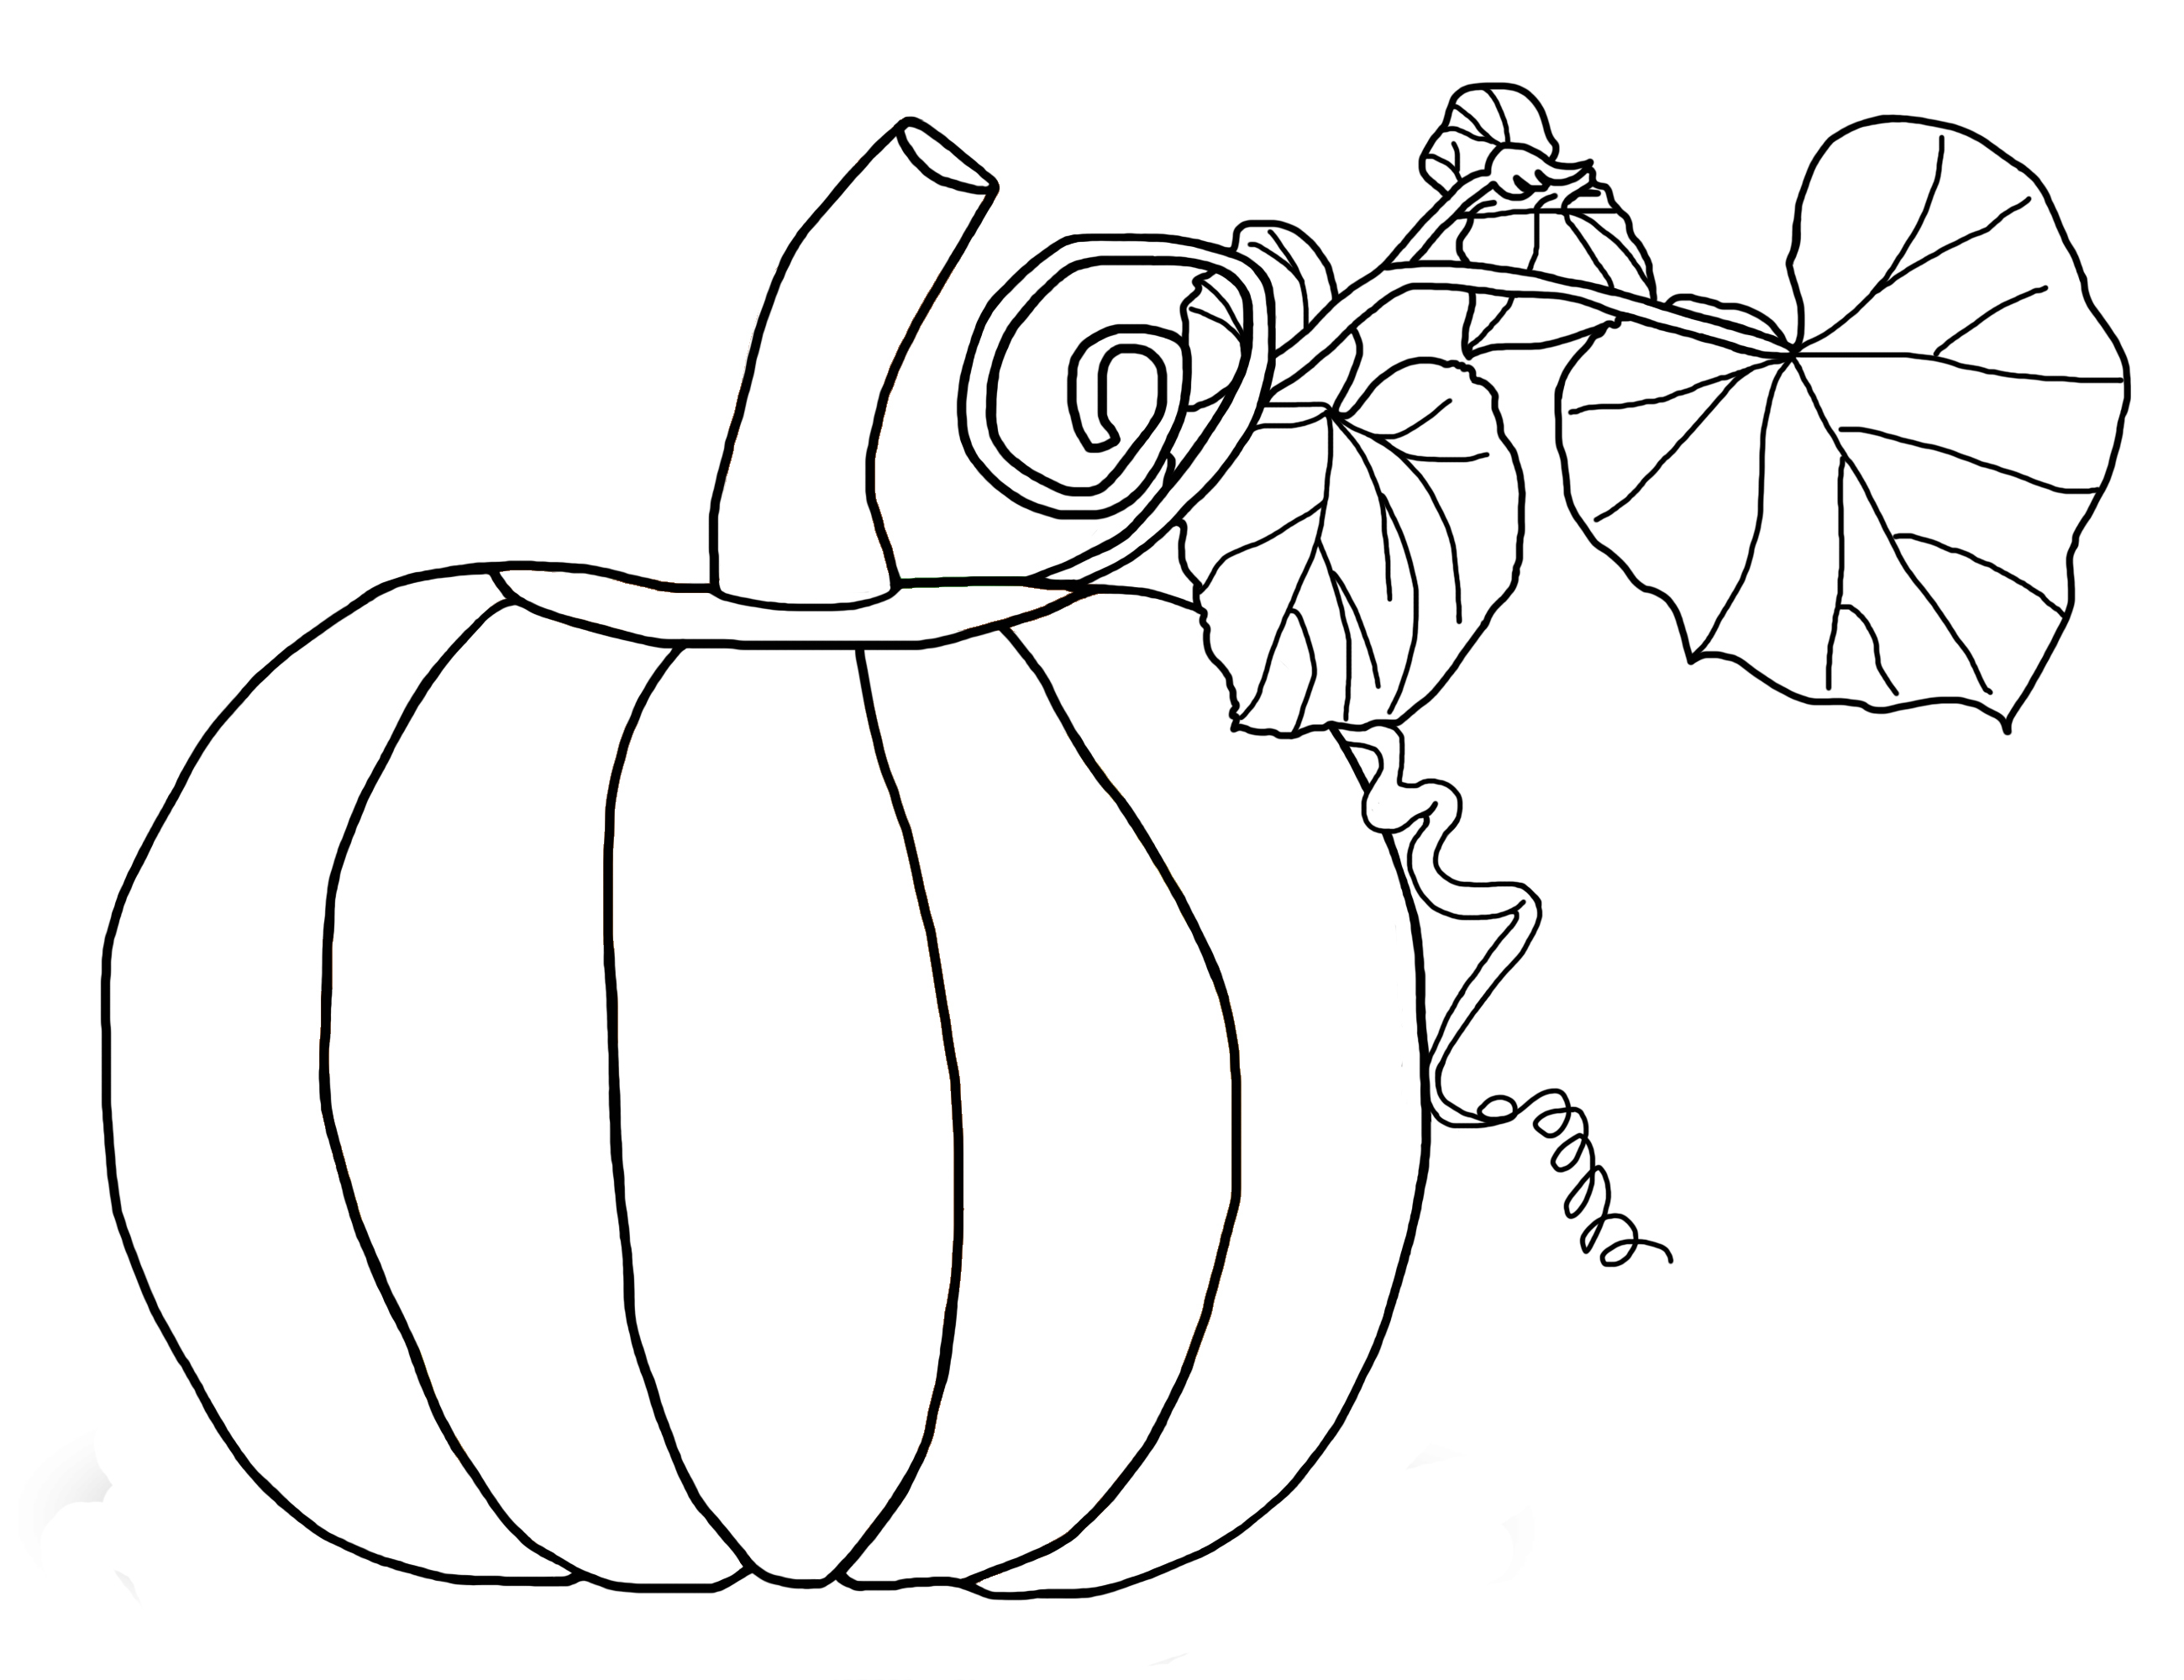 candy corn and pumpkins coloring pages